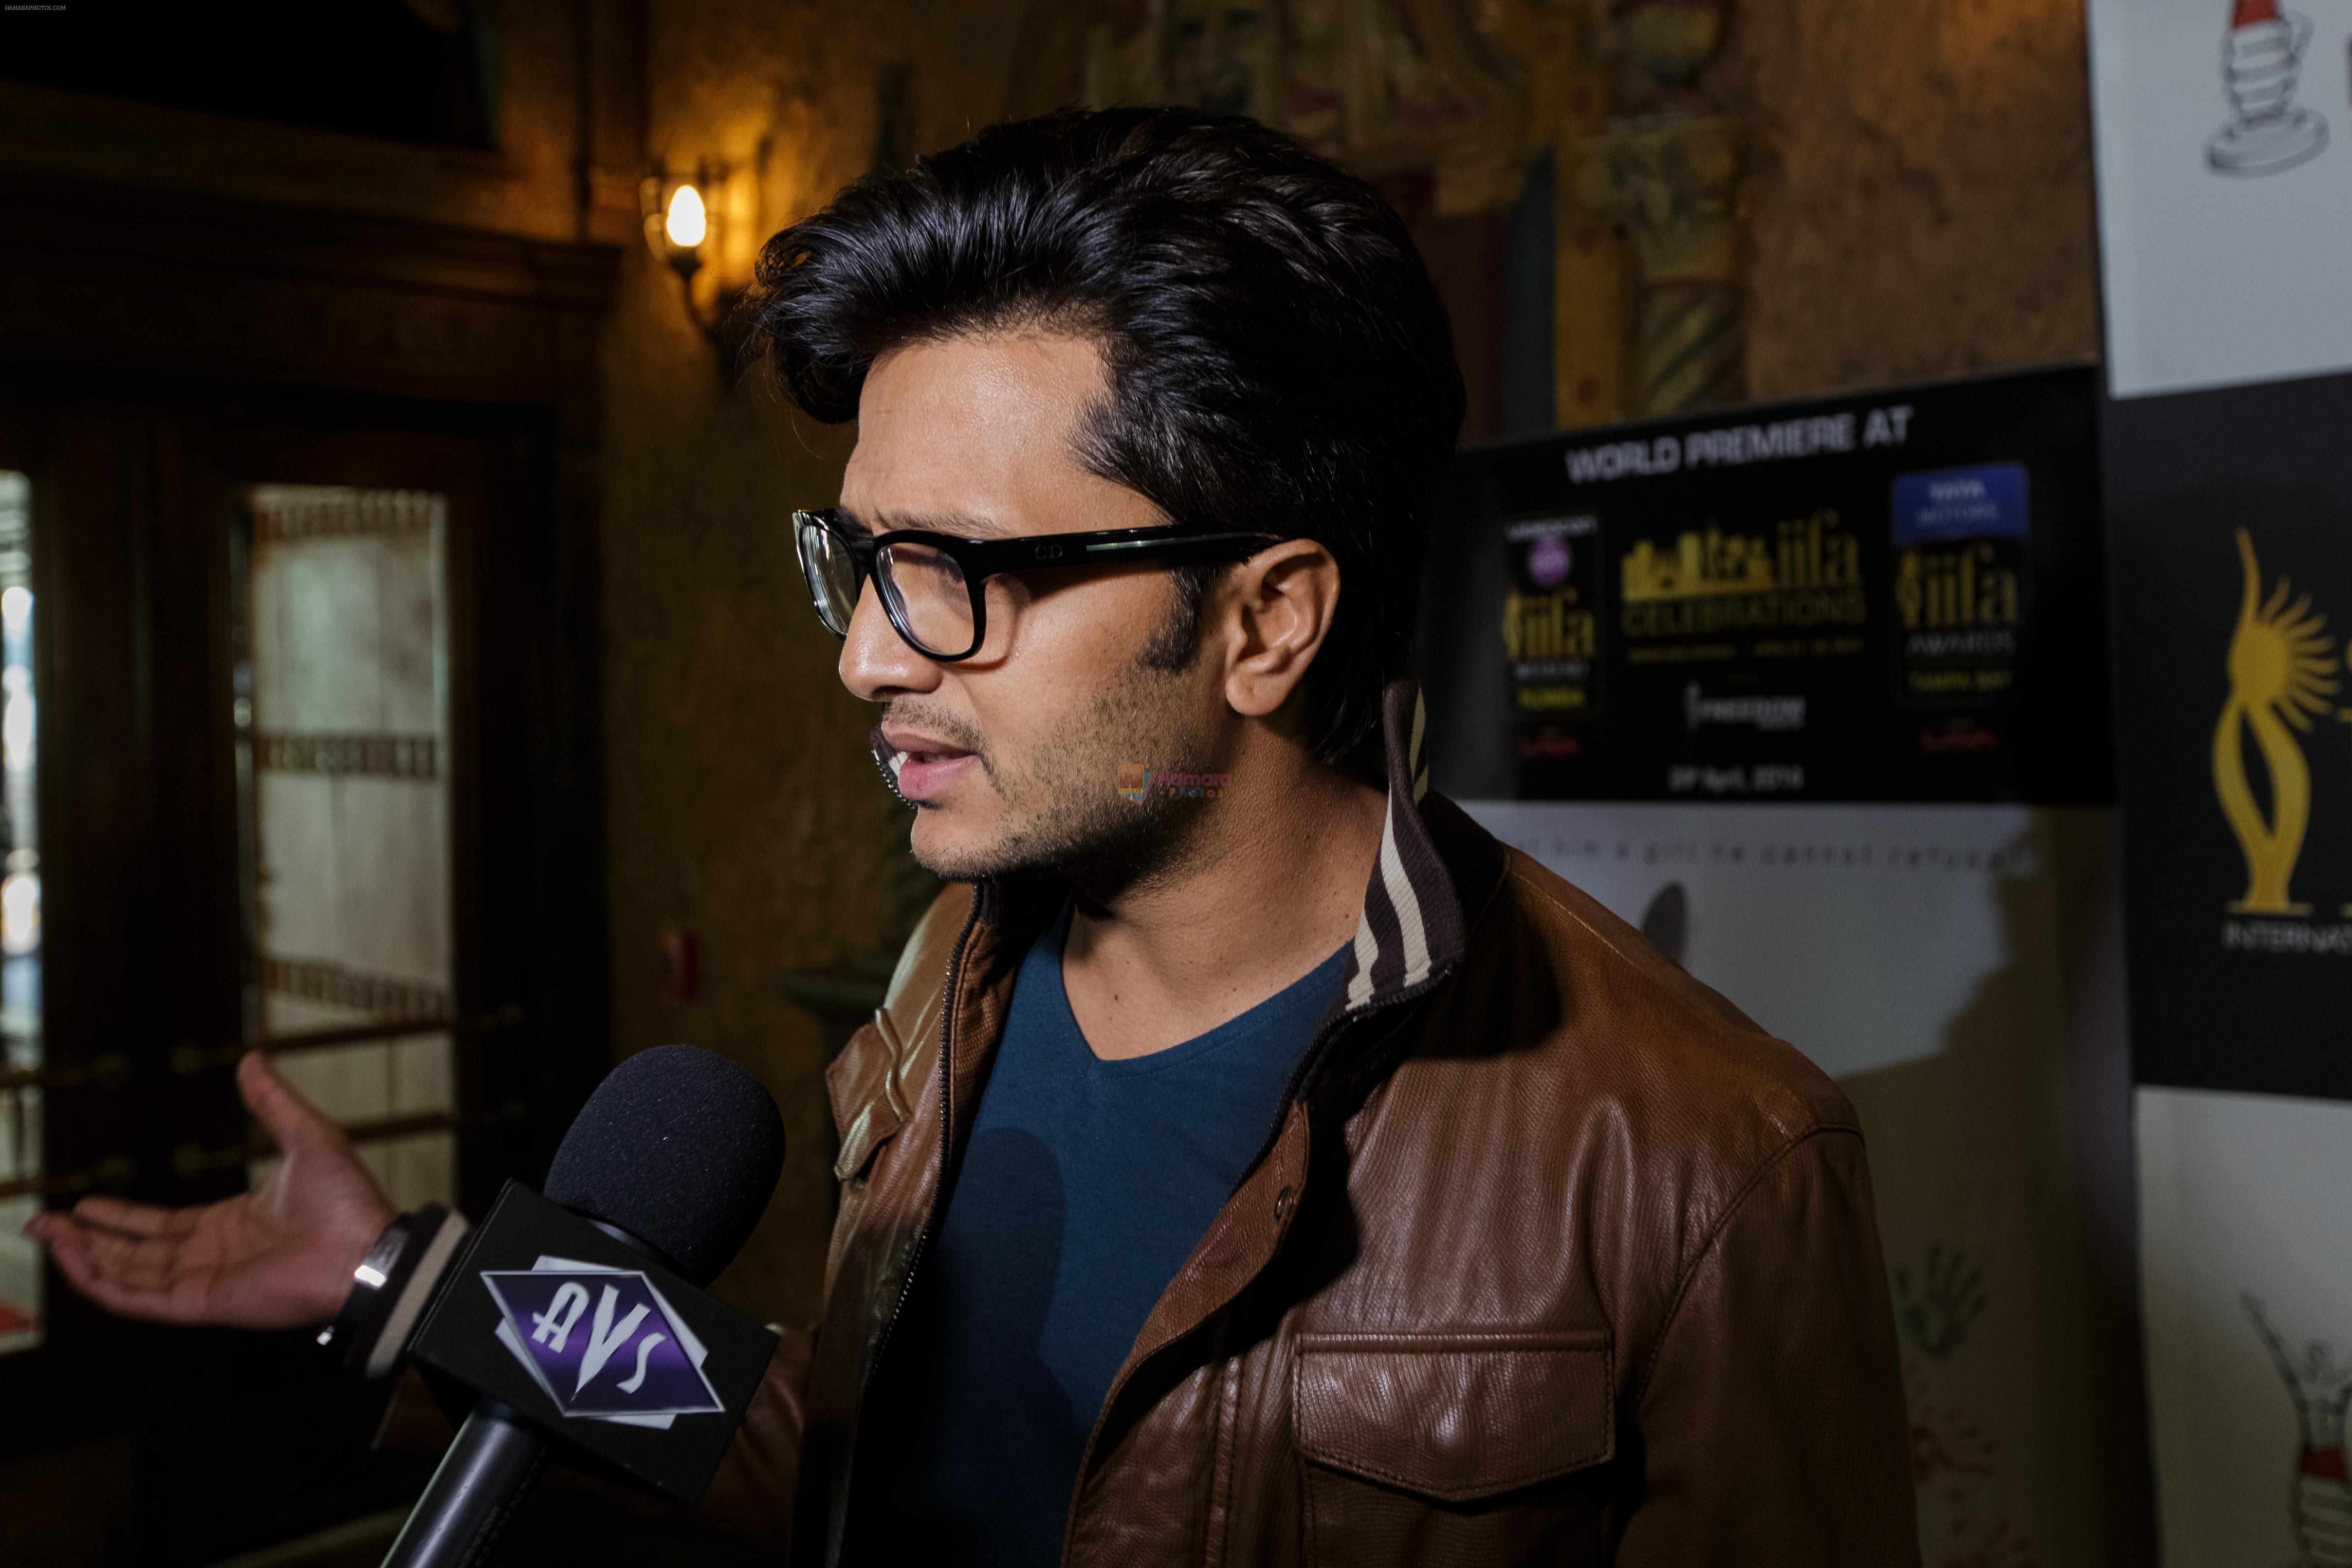 Riteish Deshmukh at IIFA Premier and Workshop by Anupam Kher in Tampa Theater on 24th April 2014